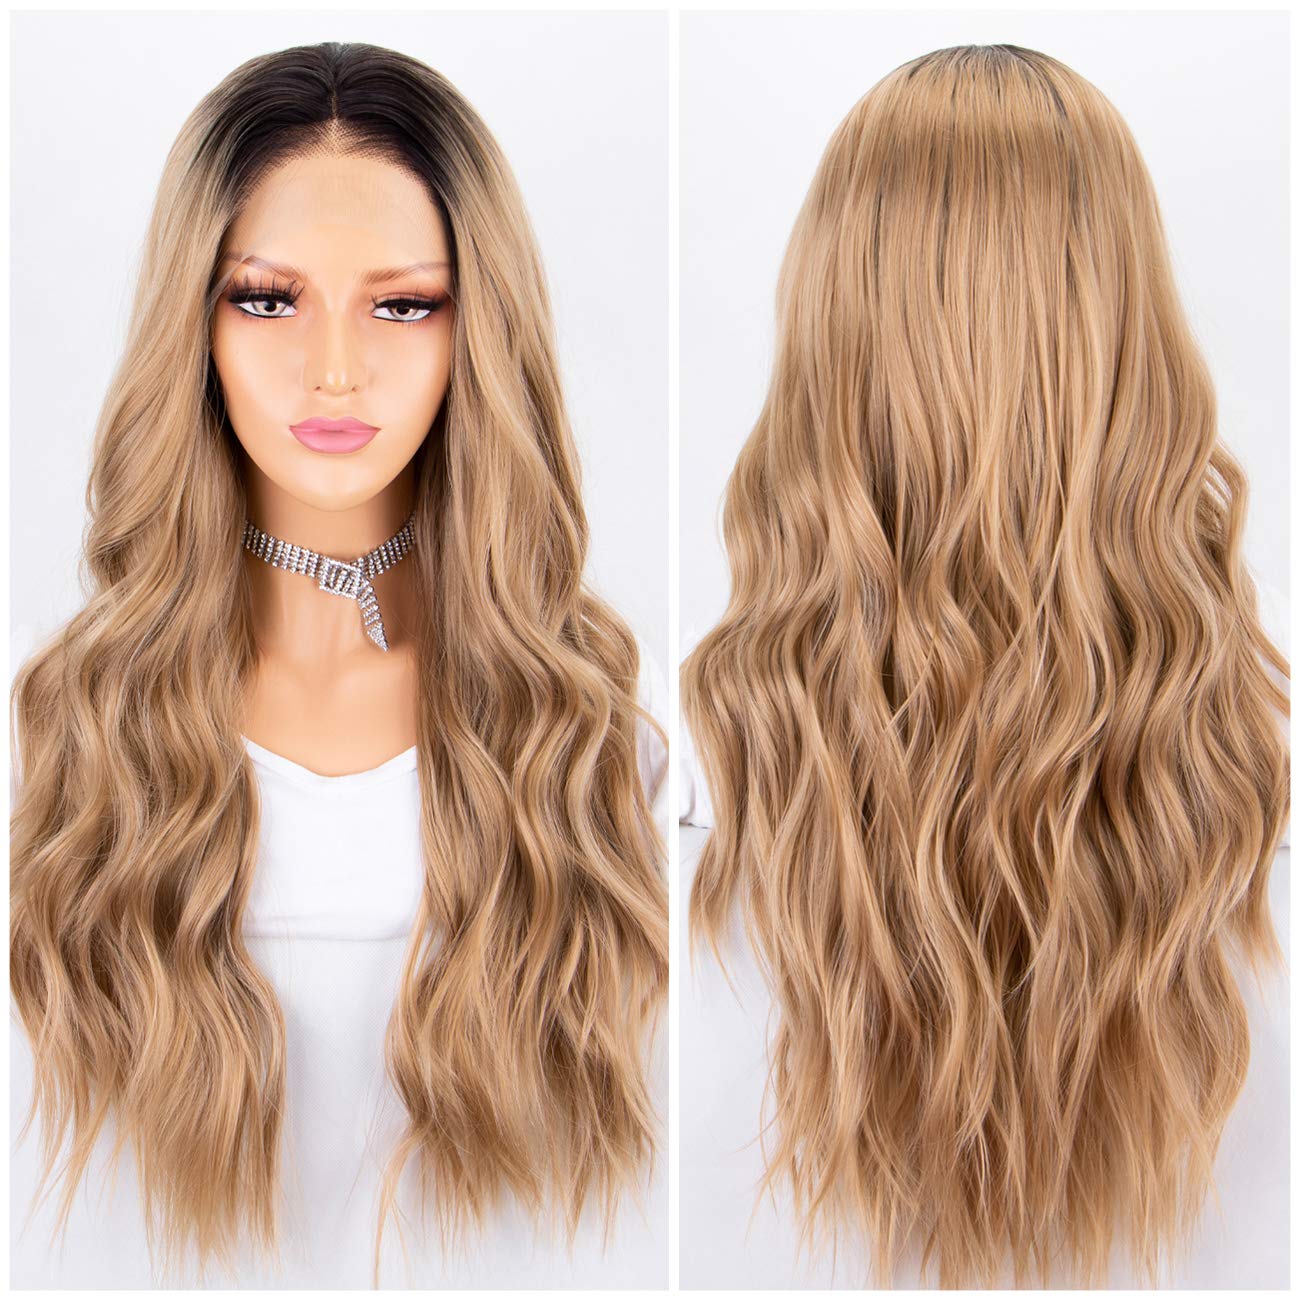 Blonde Ombre Lace Front Wig 2 Tones Long Wavy Wigs for Women Glueless Synthetic Hair Replacement Wigs Heat Resistant 22 Inches